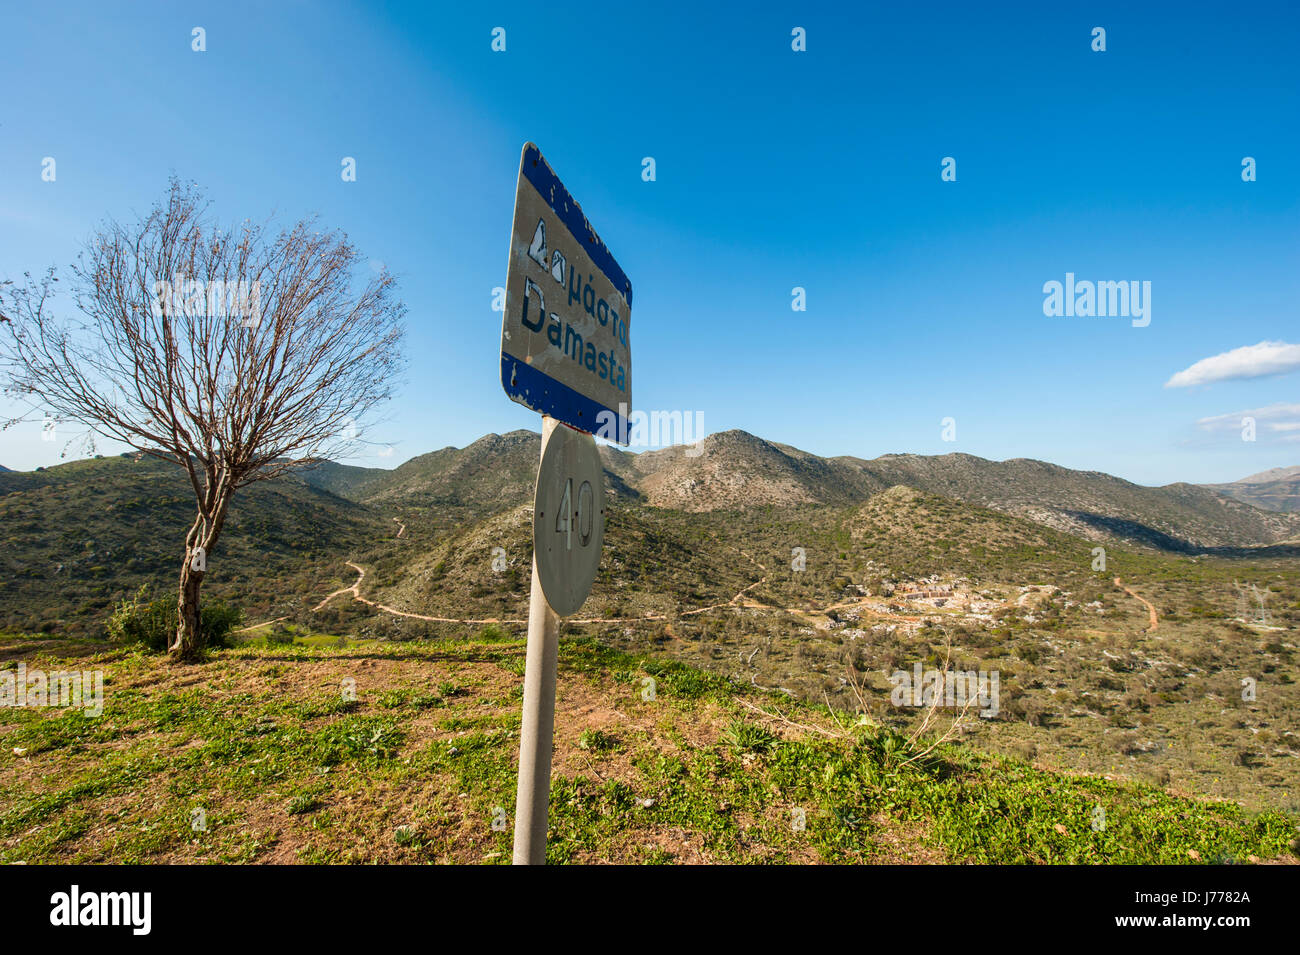 A view of mountainous landscape in norther part of Crete, Greece. Stock Photo